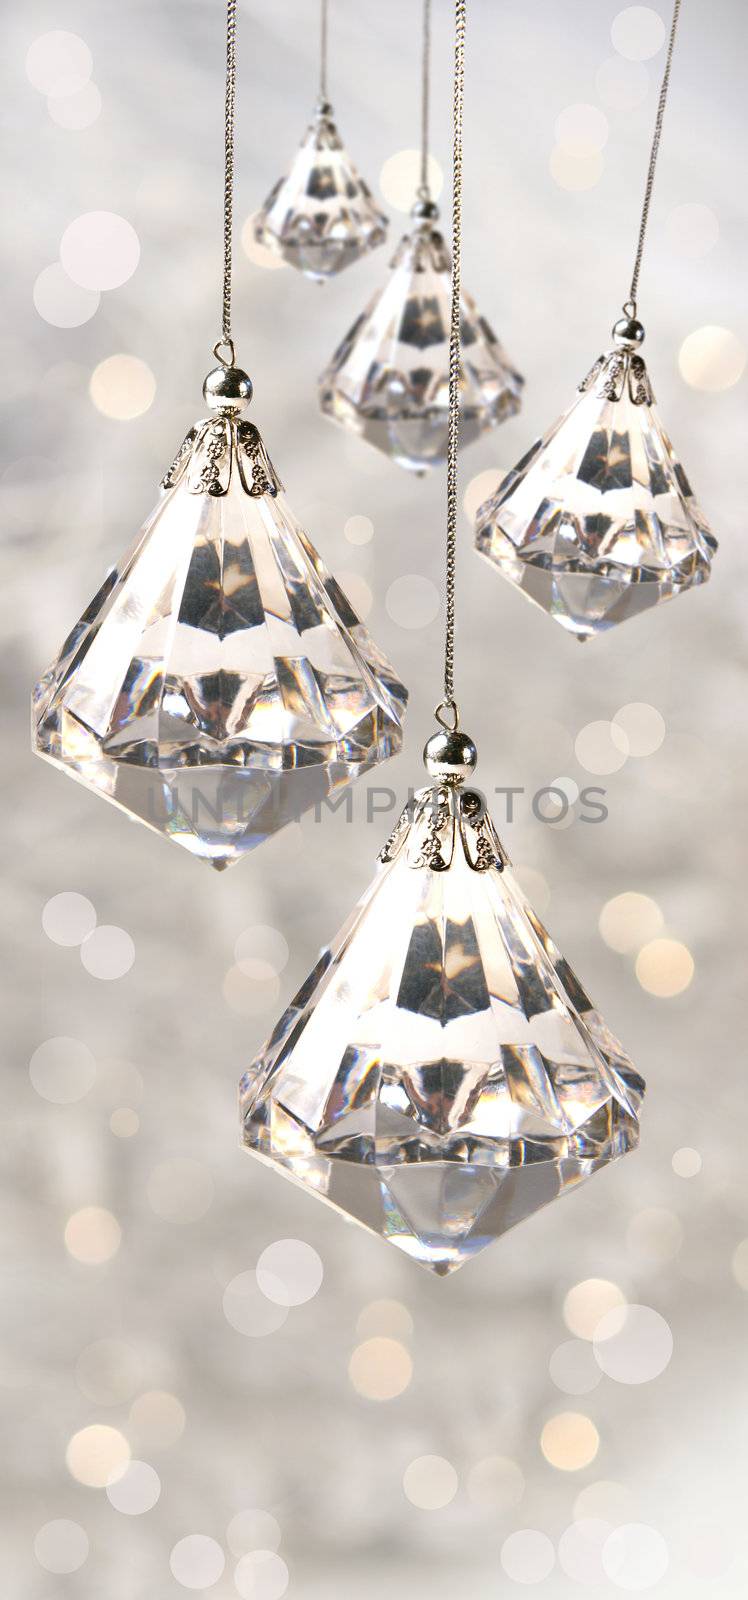 Crystal christmas ornaments against silver by Sandralise